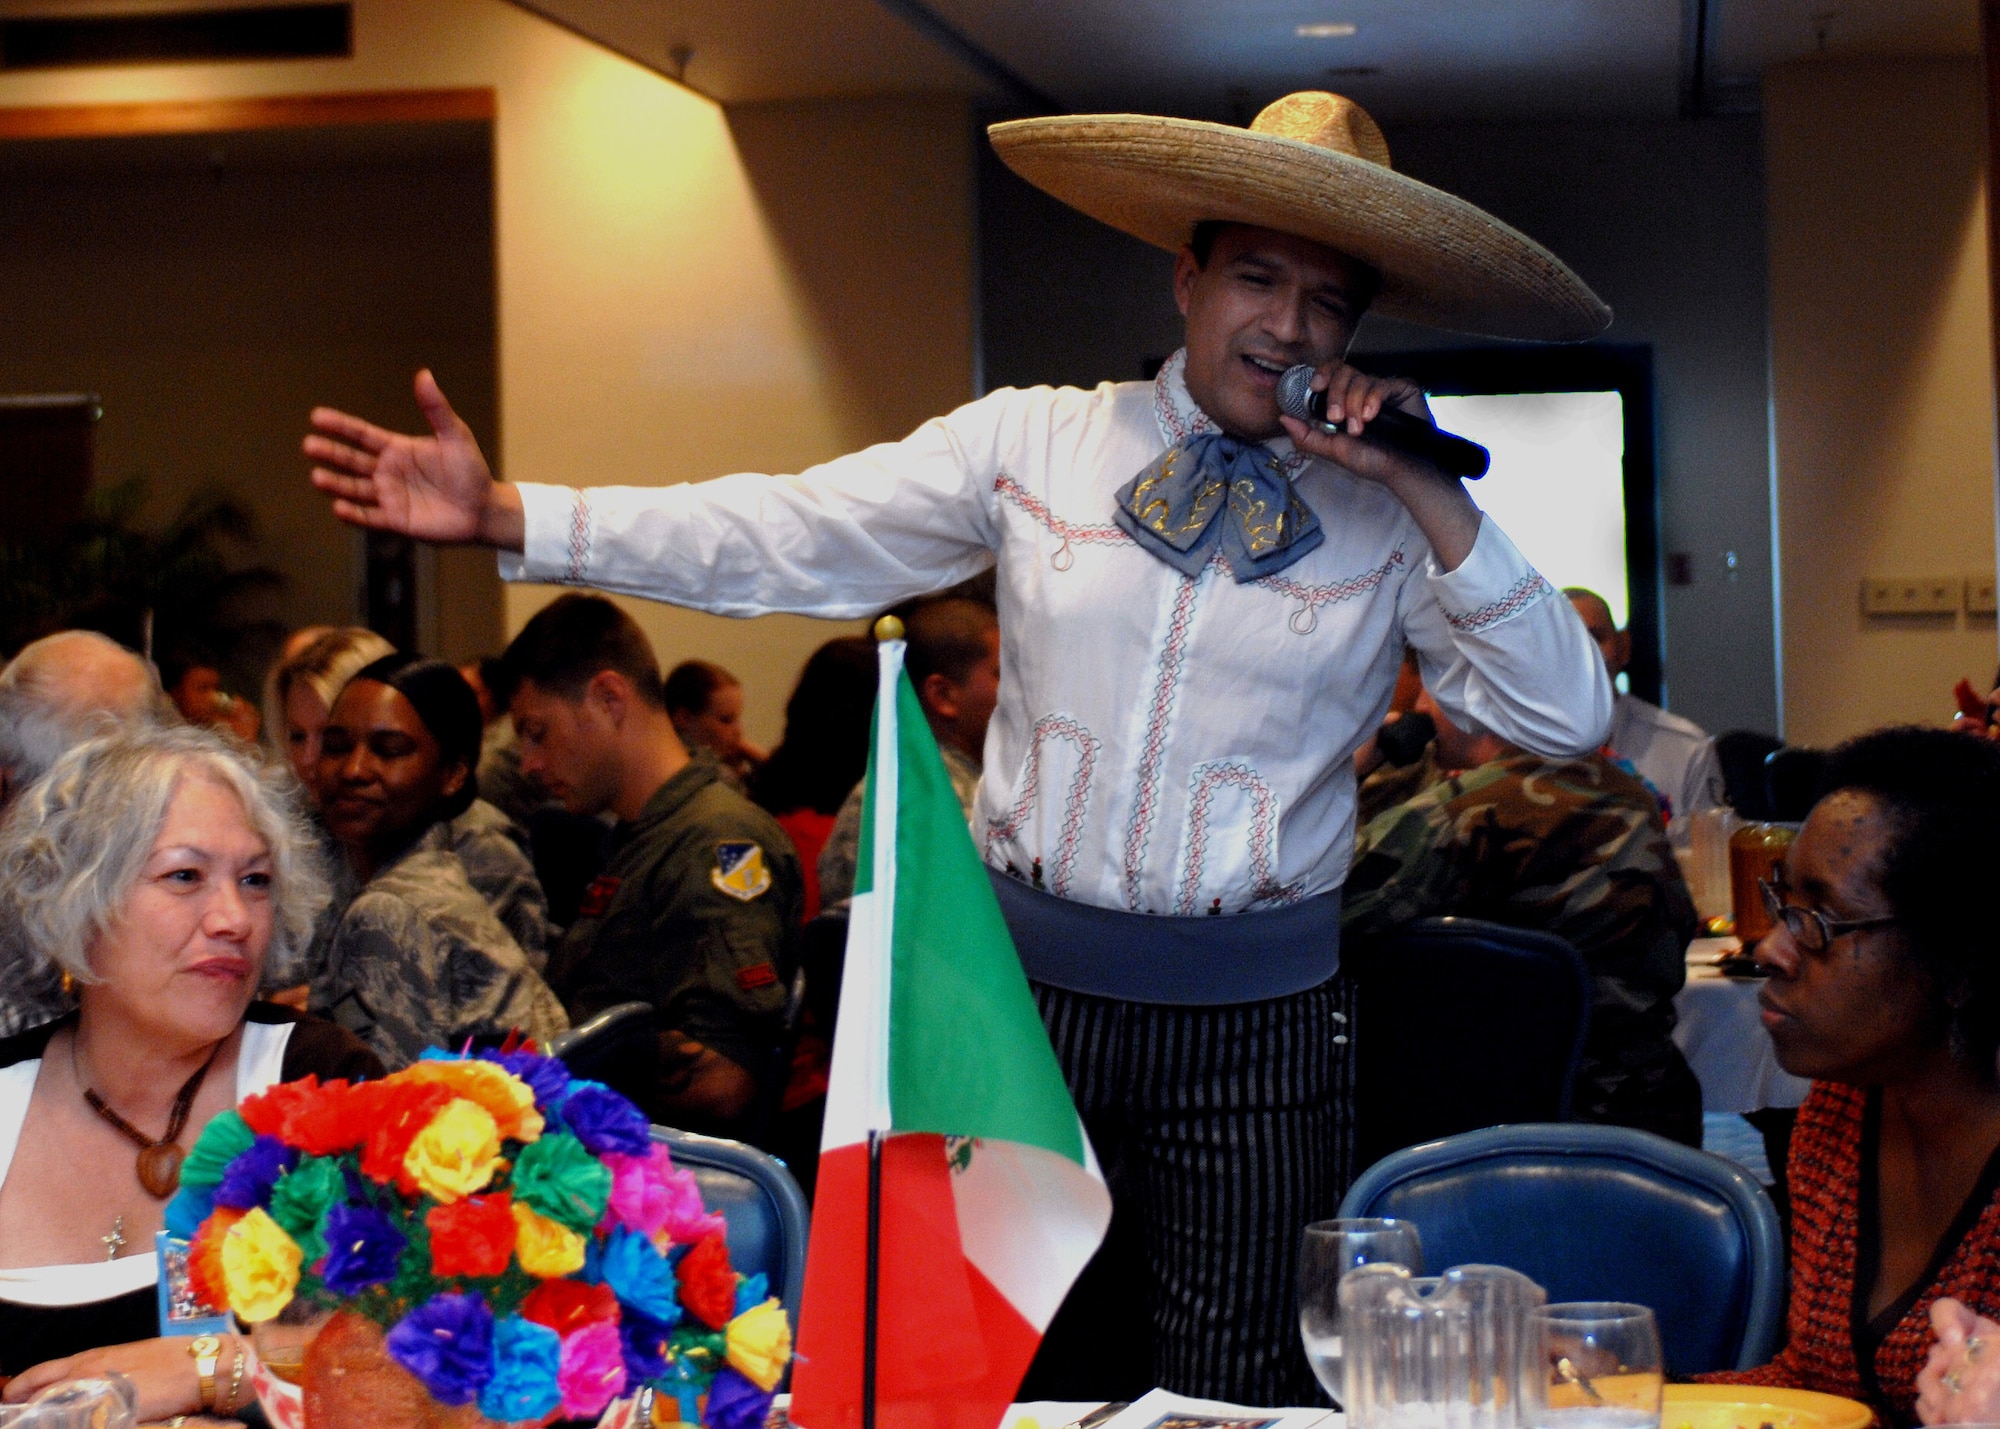 Jaime Carrasco, director of the Ballet Folklorico Quetzeles dancers, sings Cielito Lindo to all the guests who attended the Hispanic Heritage Luncheon at Holloman Air Force Base, N.M., September 25. Singer Carrasco, shows off his vocal skills with melodies inspired by Mexican music. (U.S. Air Force photo/Airman 1st. Class Veronica Salgado)